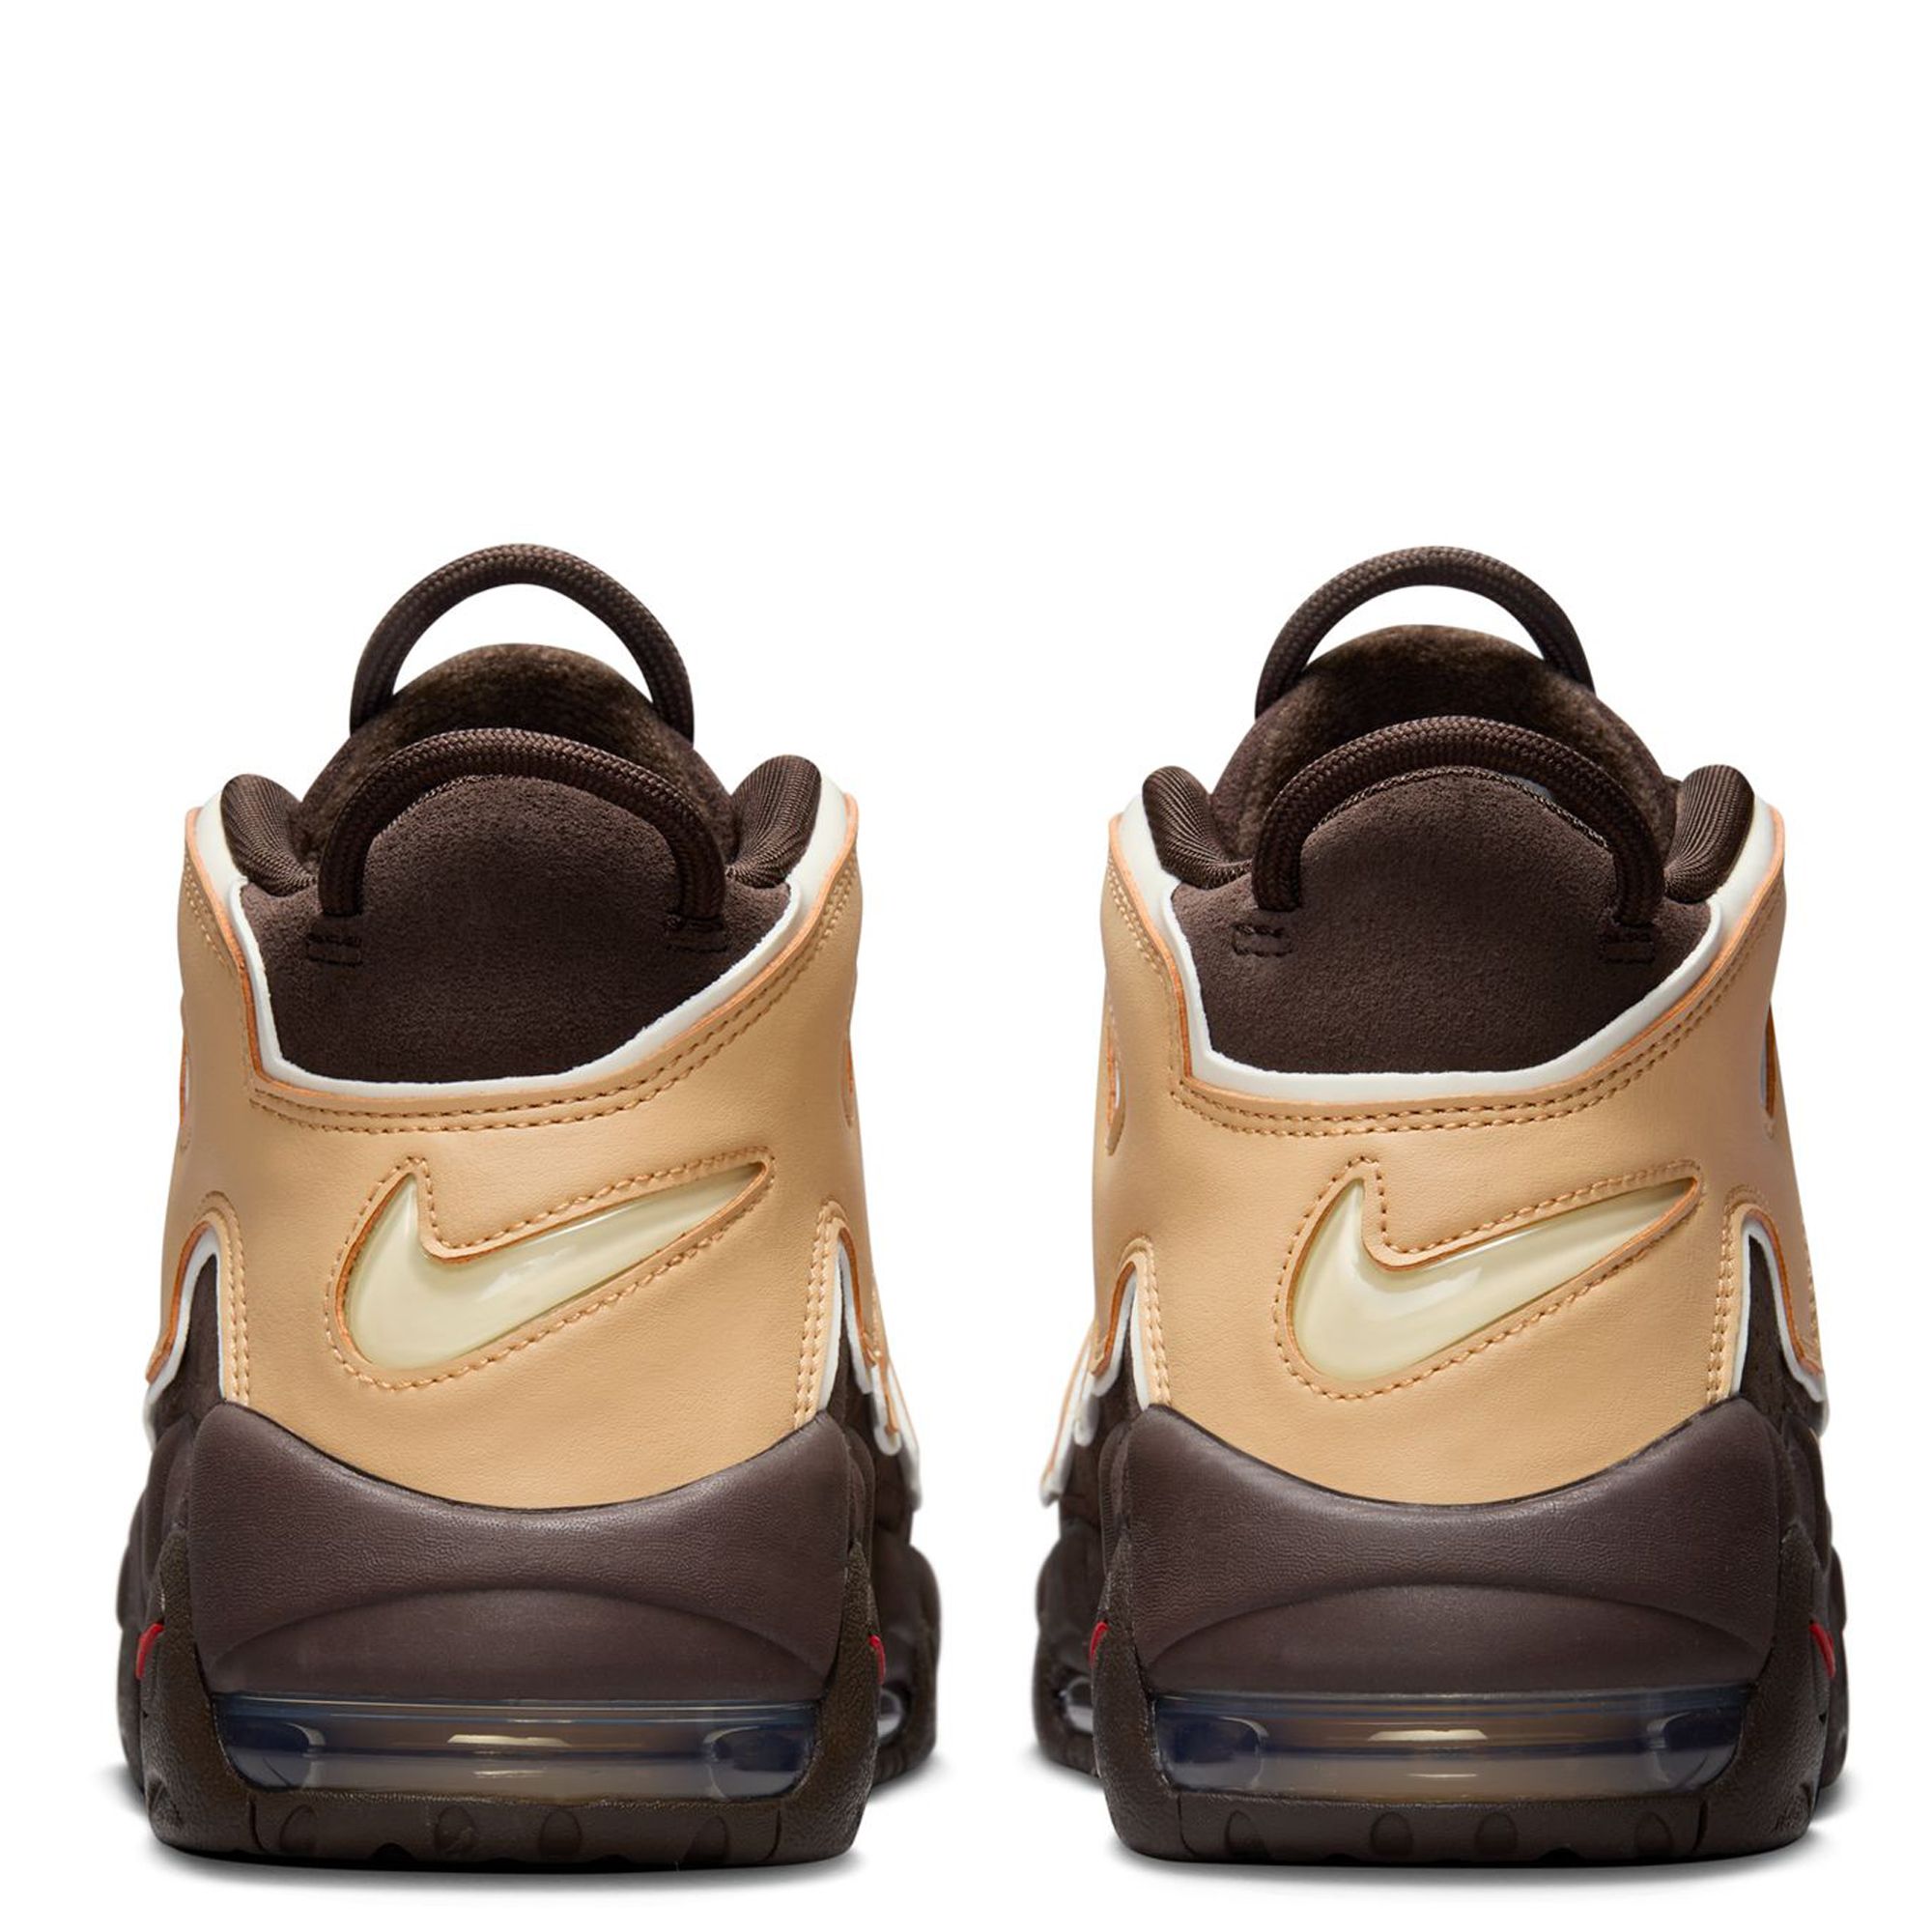 Nike Air More Uptempo Arrives in Baroque Brown